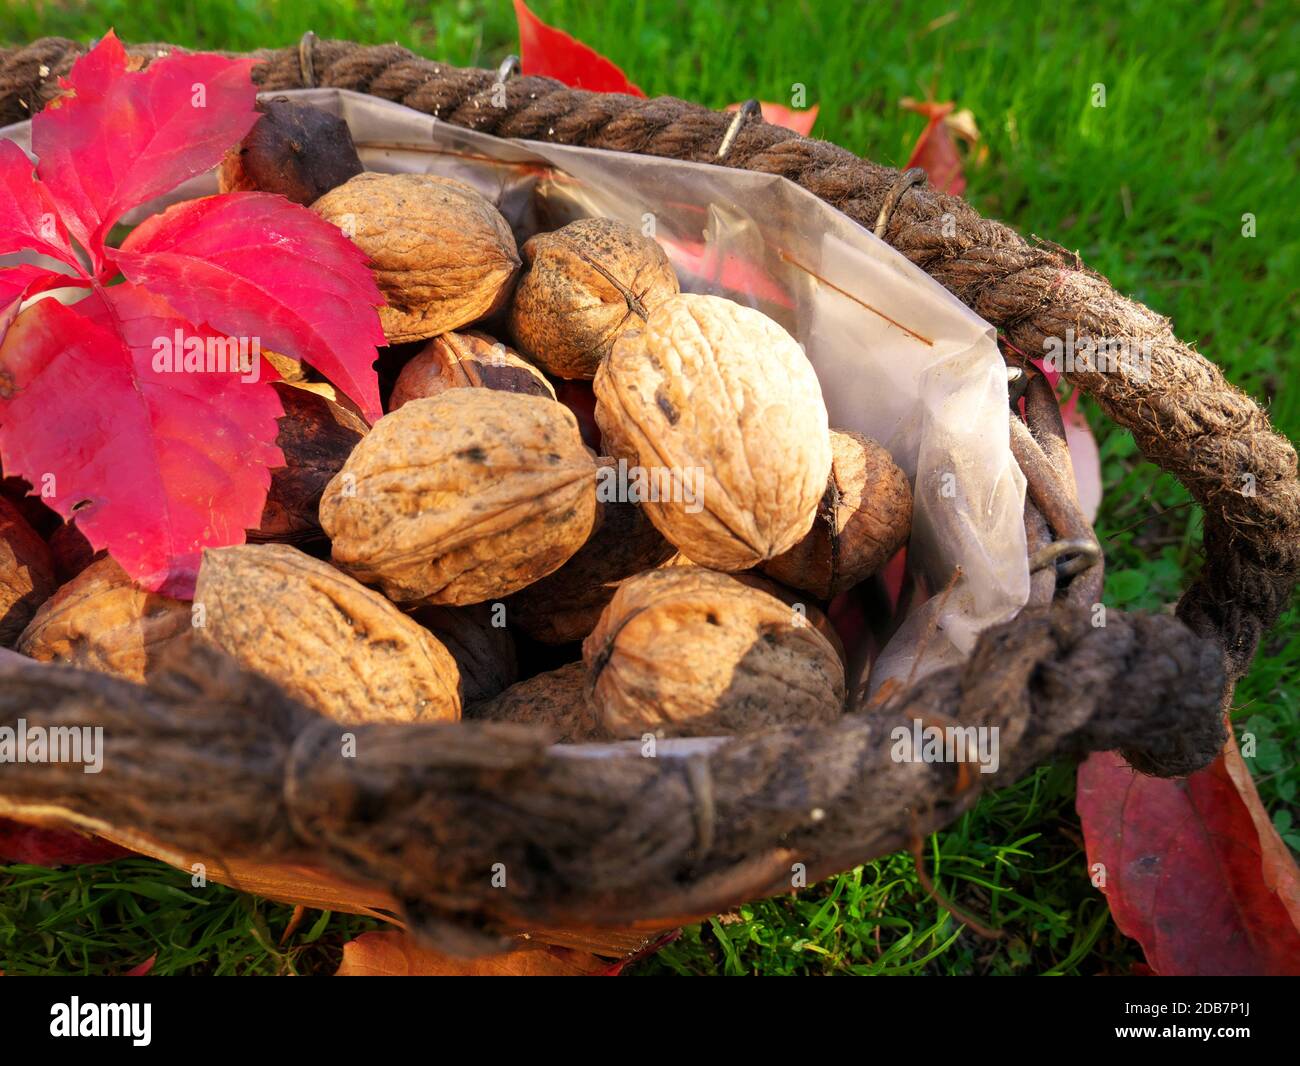 Basket of freshly harvested nuts placed in the grass with red autumn leaves Stock Photo